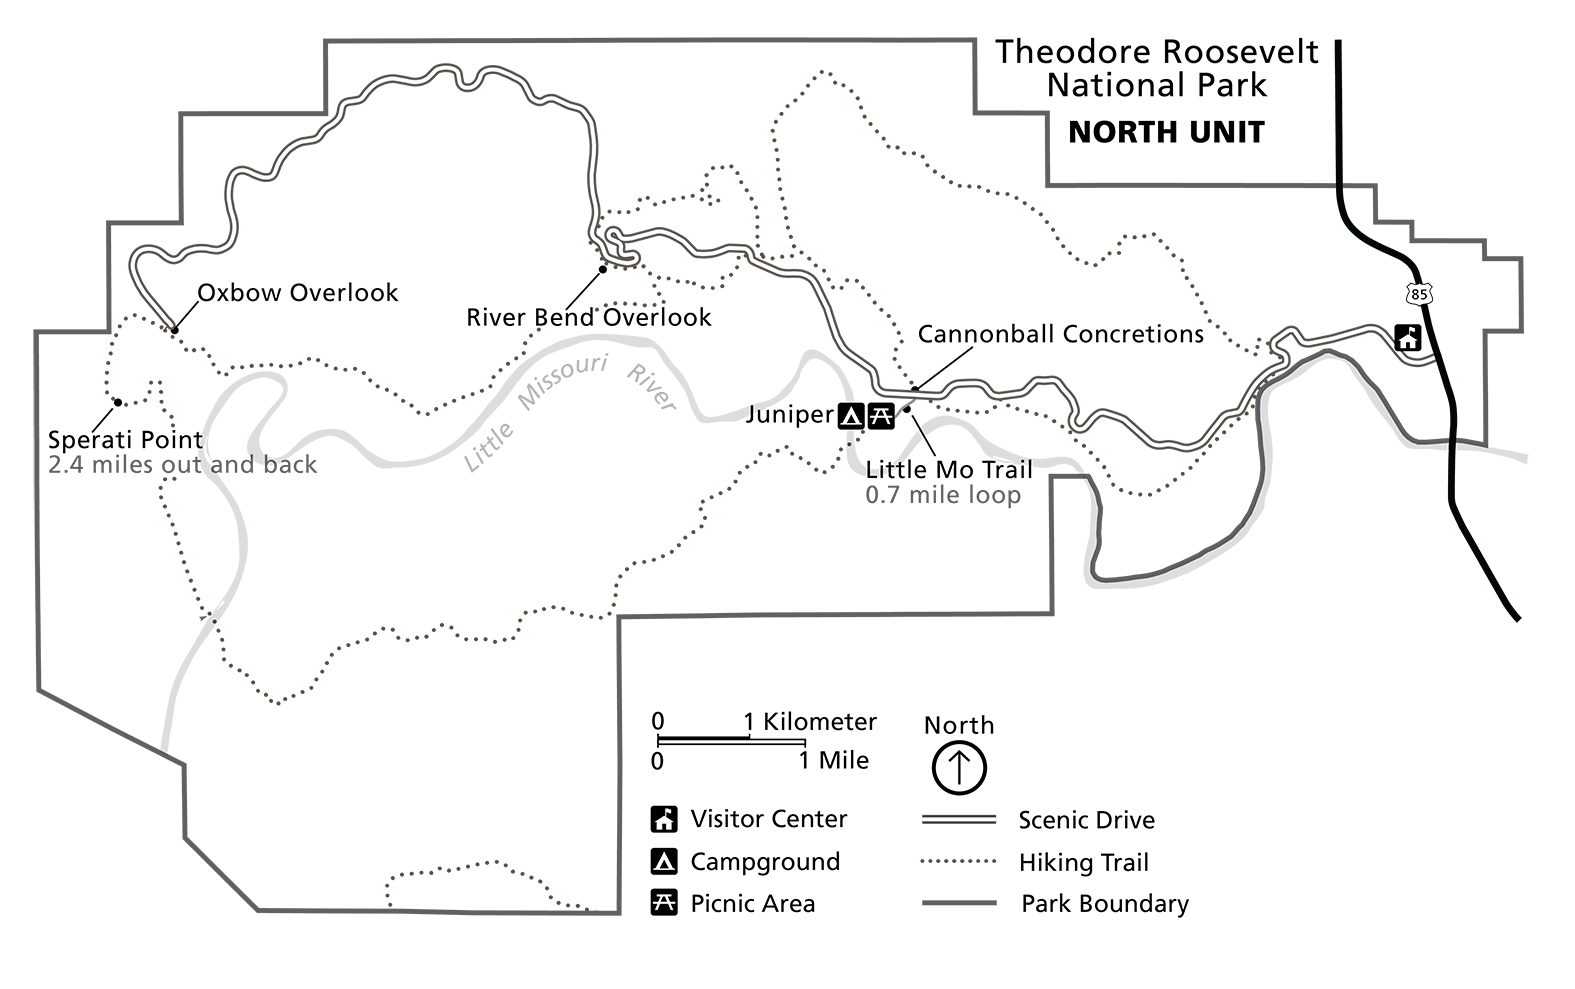 A line drawing map showing the North Unit' s boundary, A scenic drive stretching from the east to the west, and numerous trails and overlooks